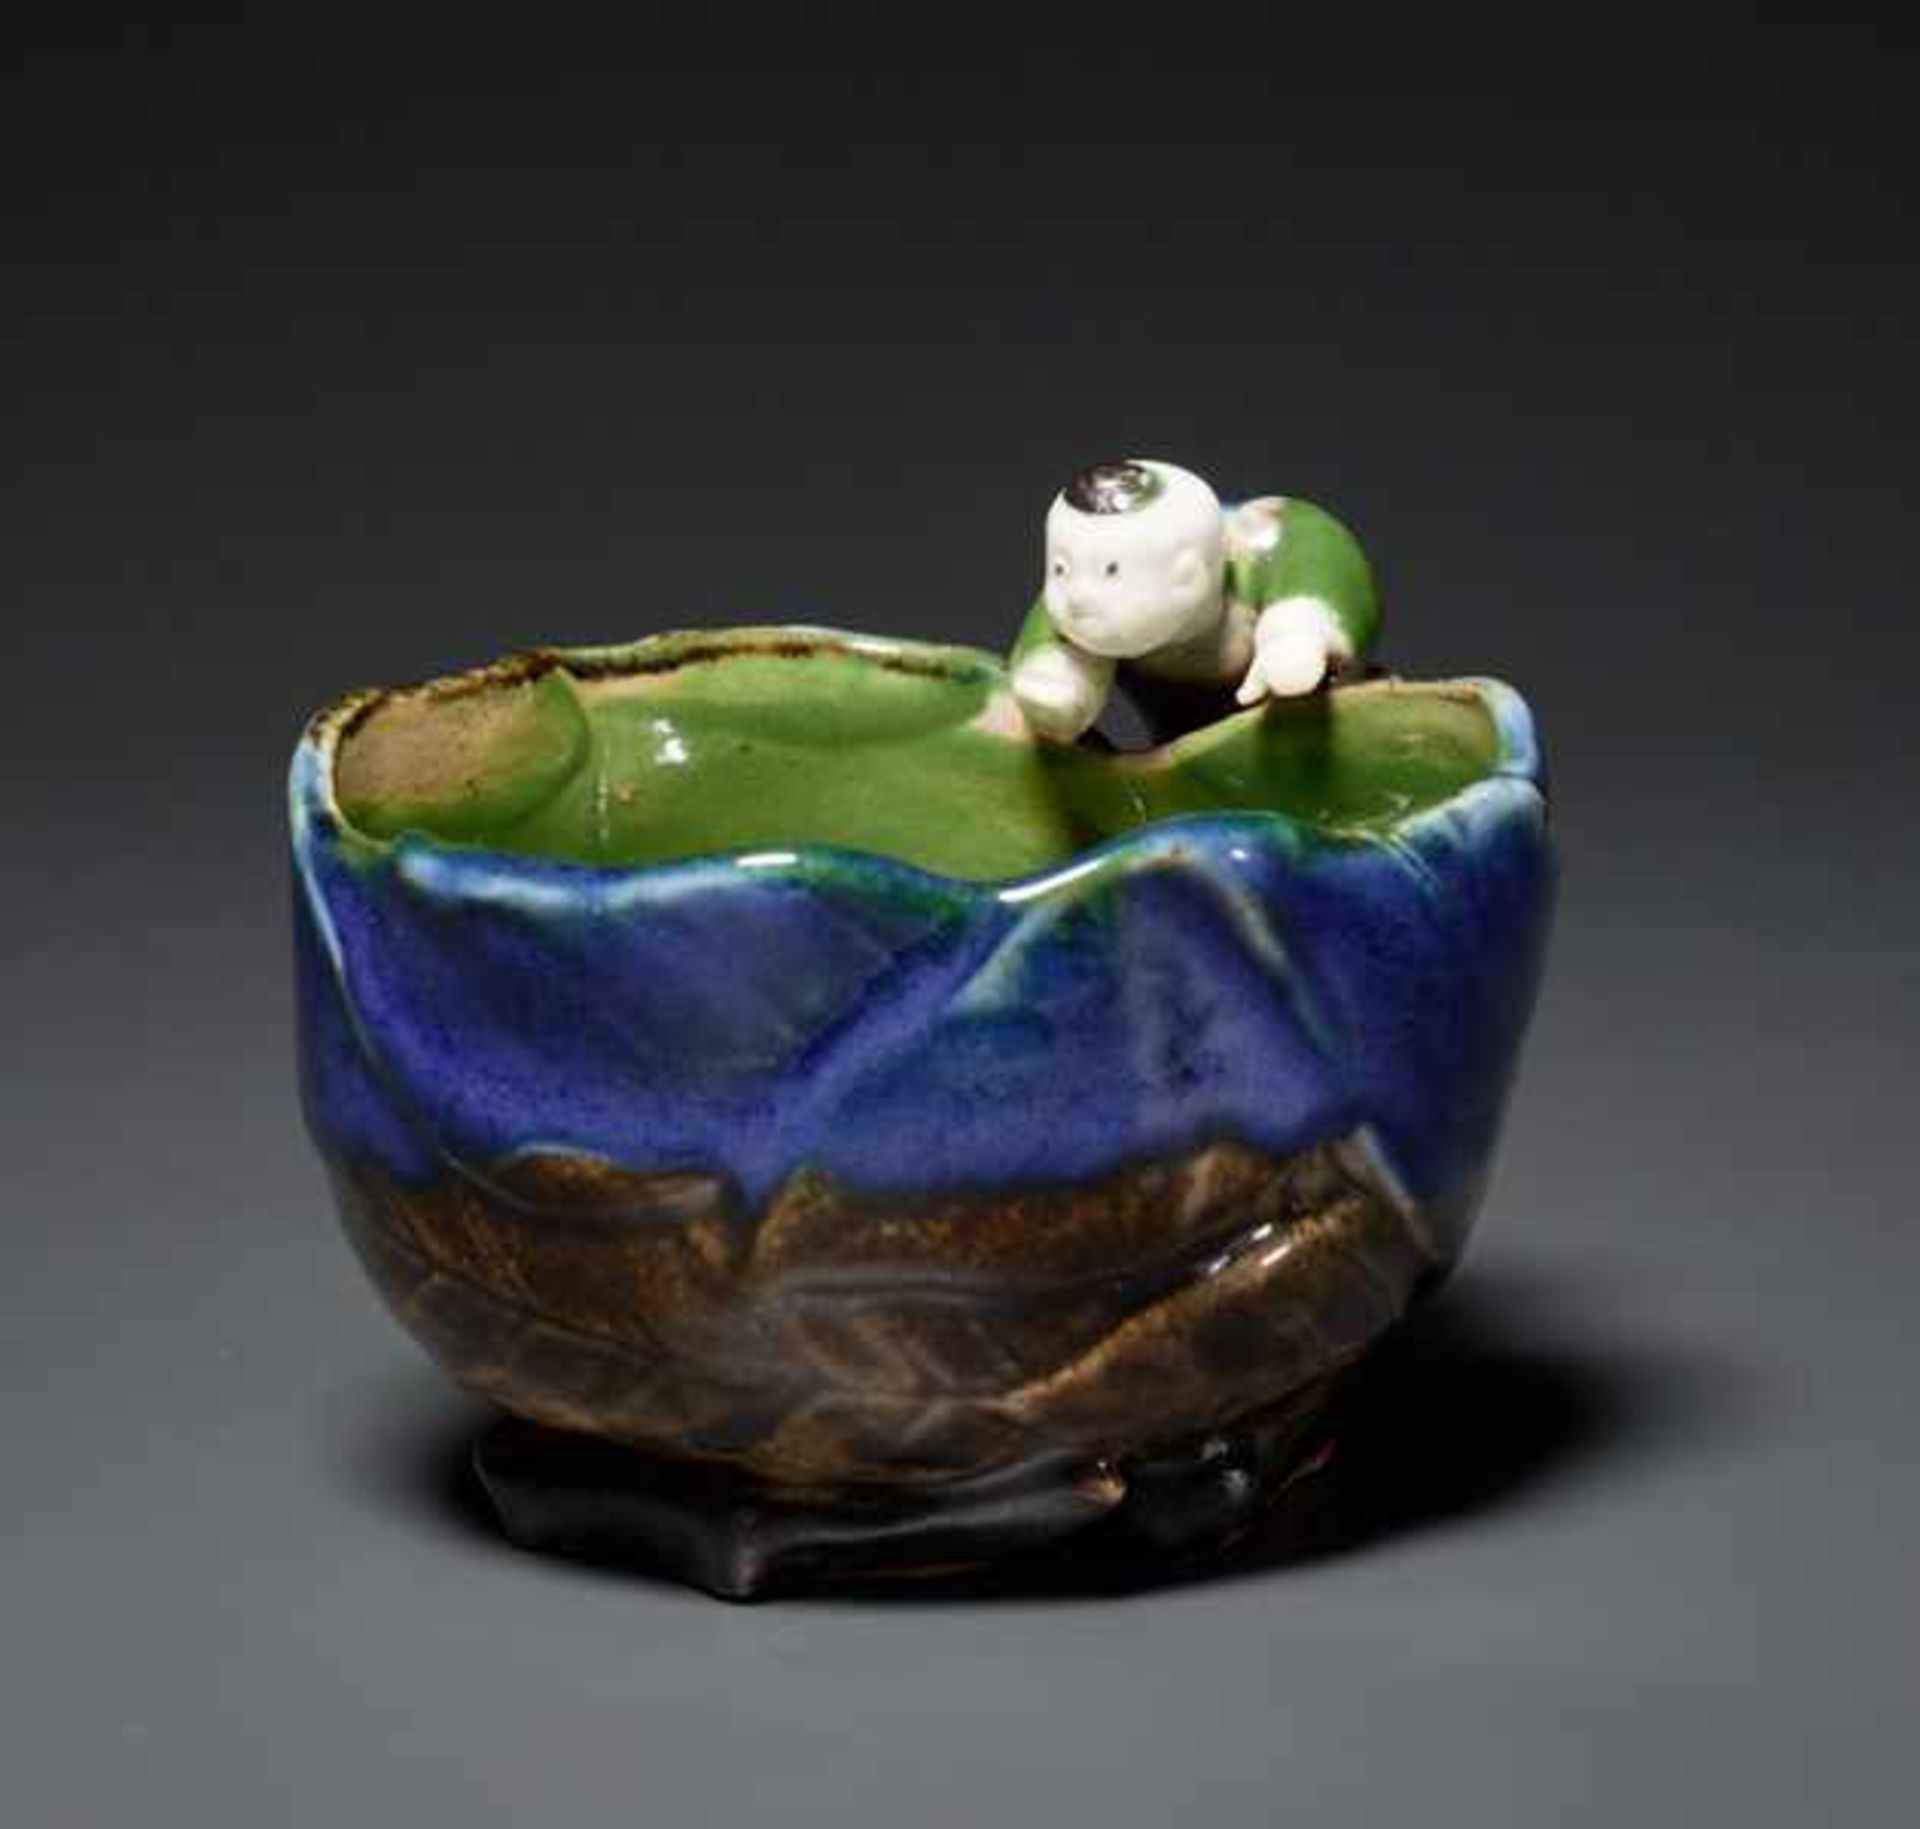 CHAWAN Glazed ceramic. Japan, ca. MeijiIdiosyncratic and absolutely unique vessel with partially